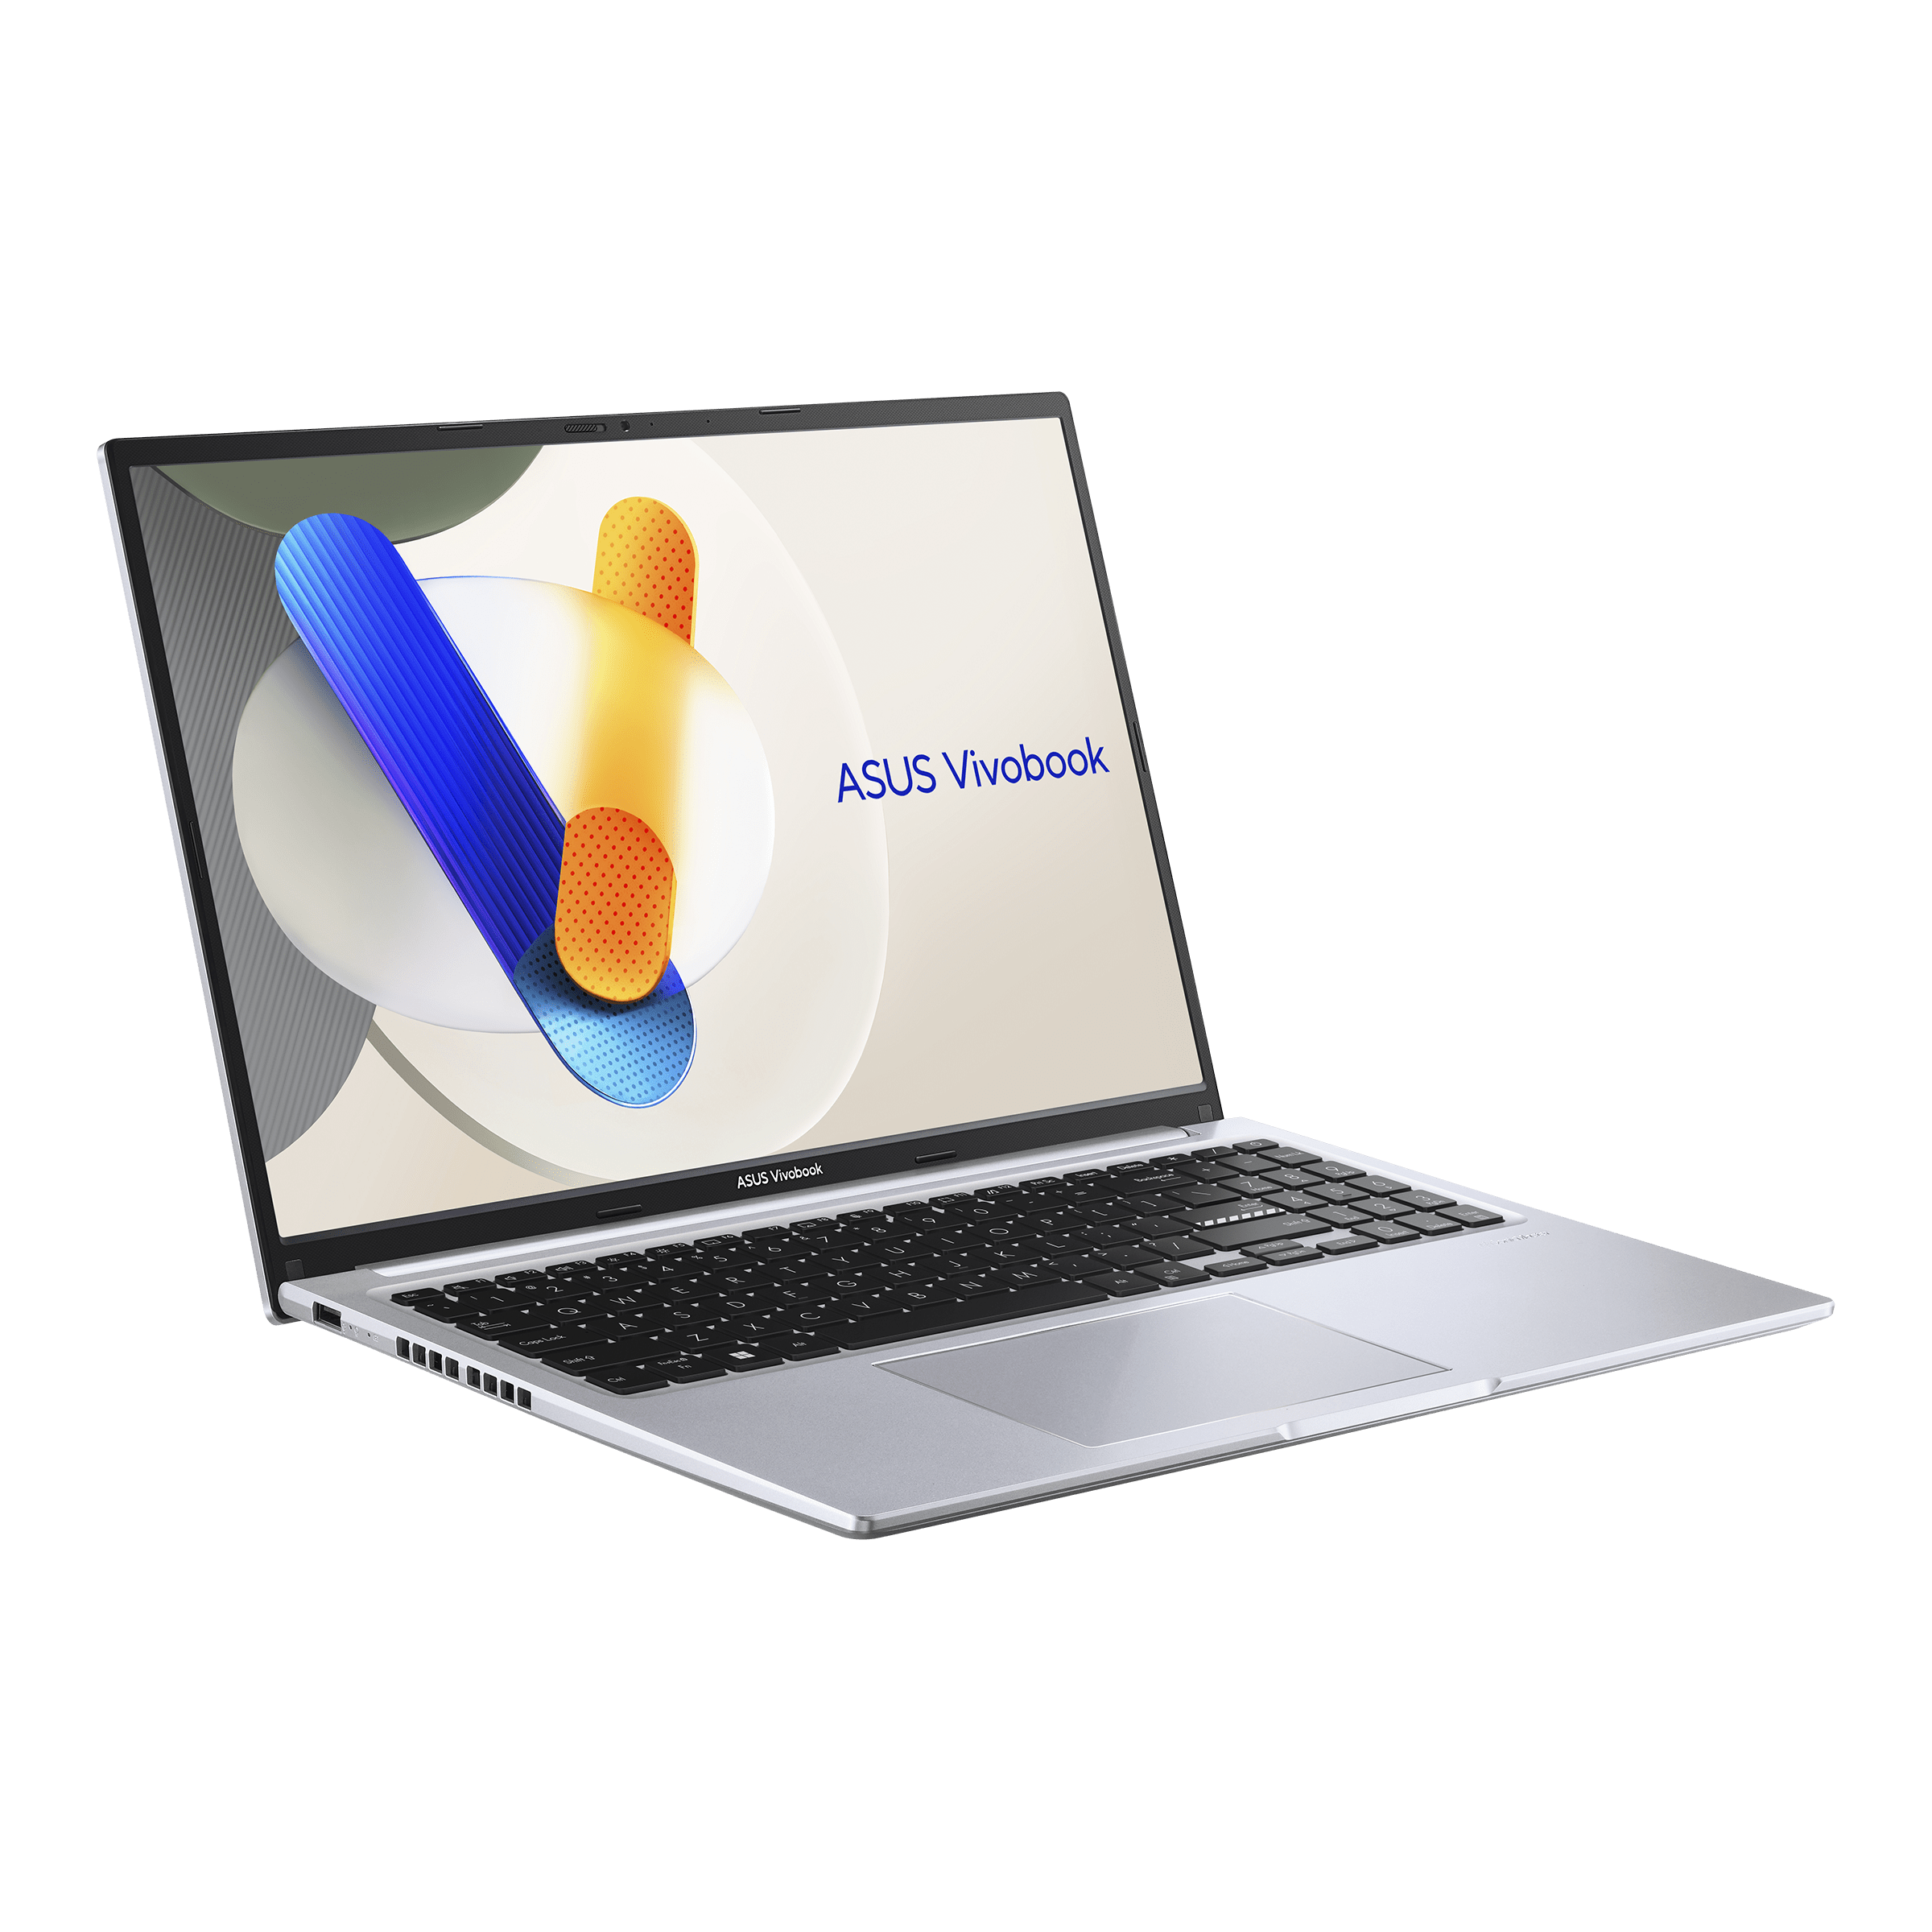 ASUS Vivobook 17 (X1704)｜Laptops For Home｜ASUS Global